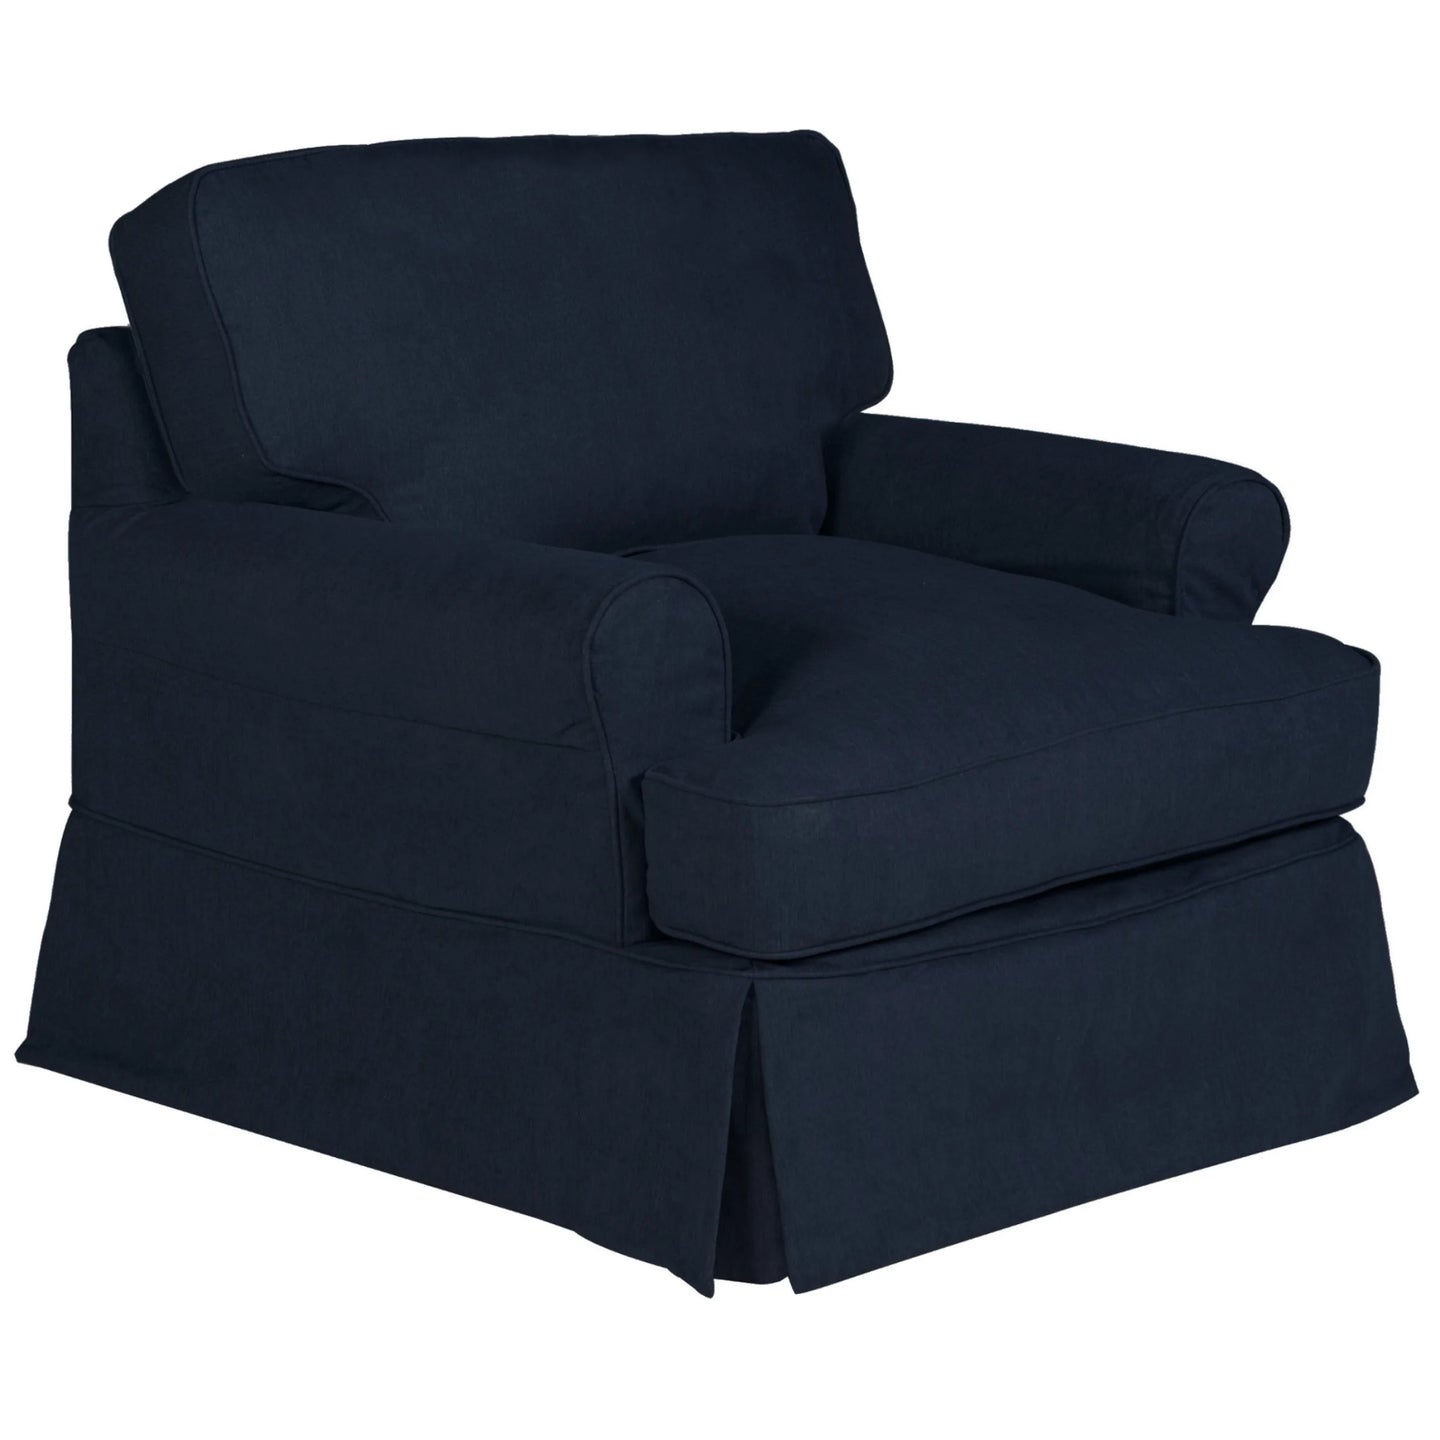 Sunset Trading Horizon Slipcovered T-Cushion Chair | Stain Resistant Performance Fabric | Navy Blue